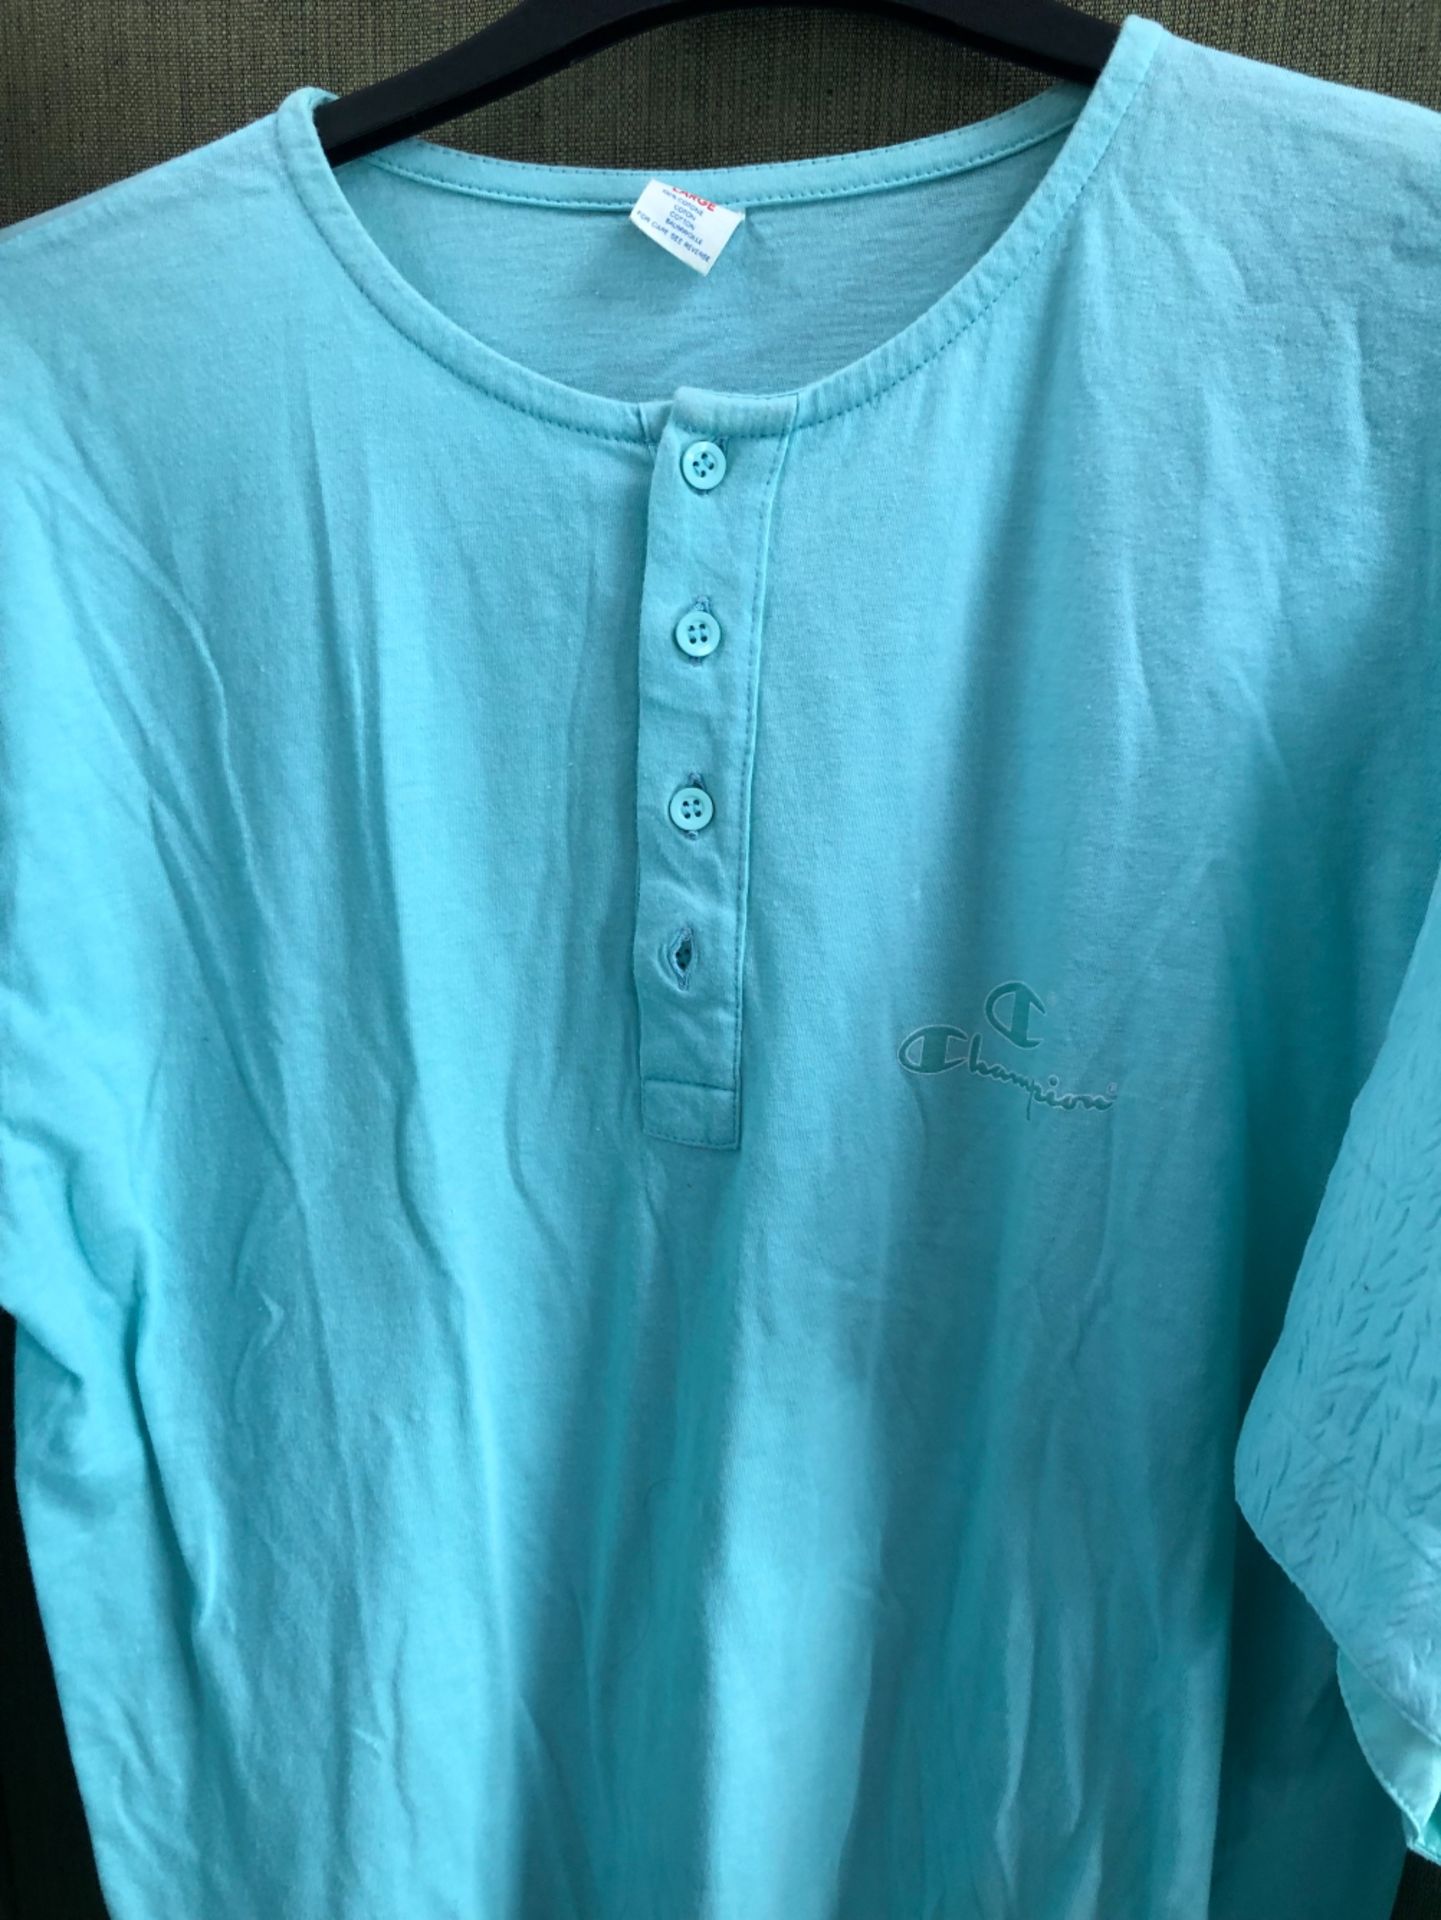 A MINT GREEN ELLESSE T-SHIRT SIZE USA 10W AND SHORTS USA 12, TOGETHER WITH A 100% COTTON MATCHING - Image 2 of 9